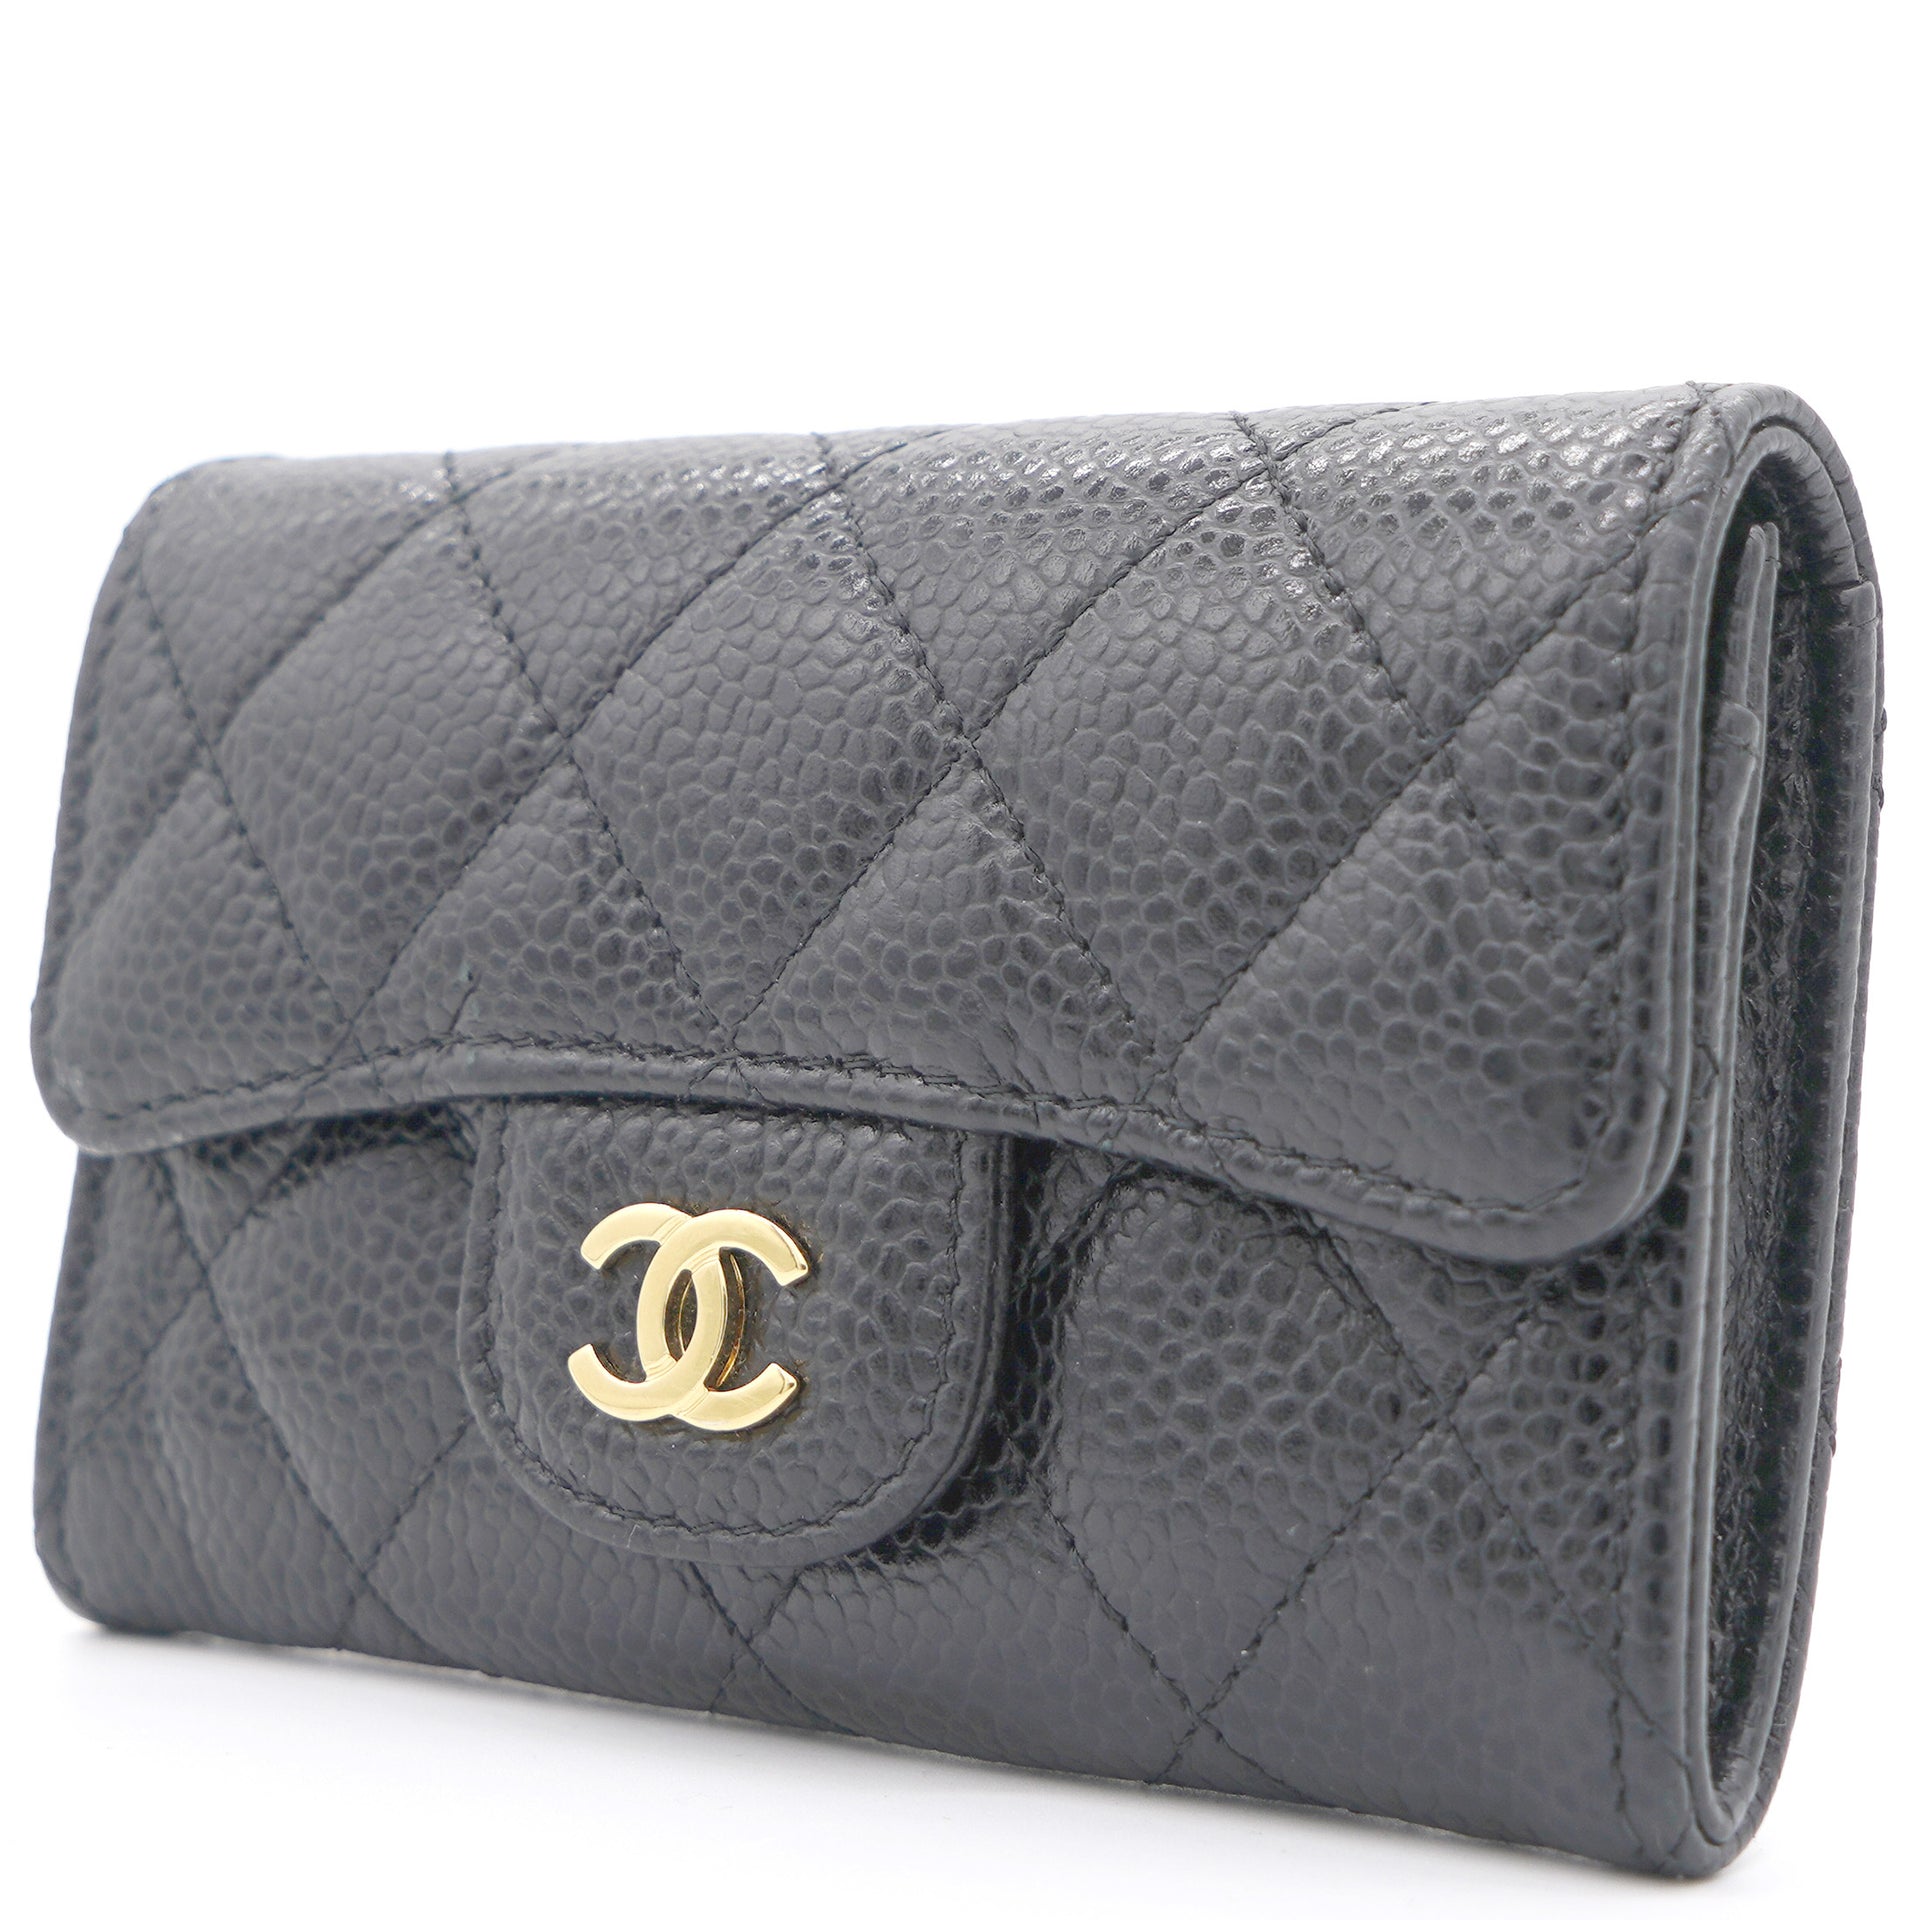 Chanel Classic Pink Small Flap Wallet New  eBay